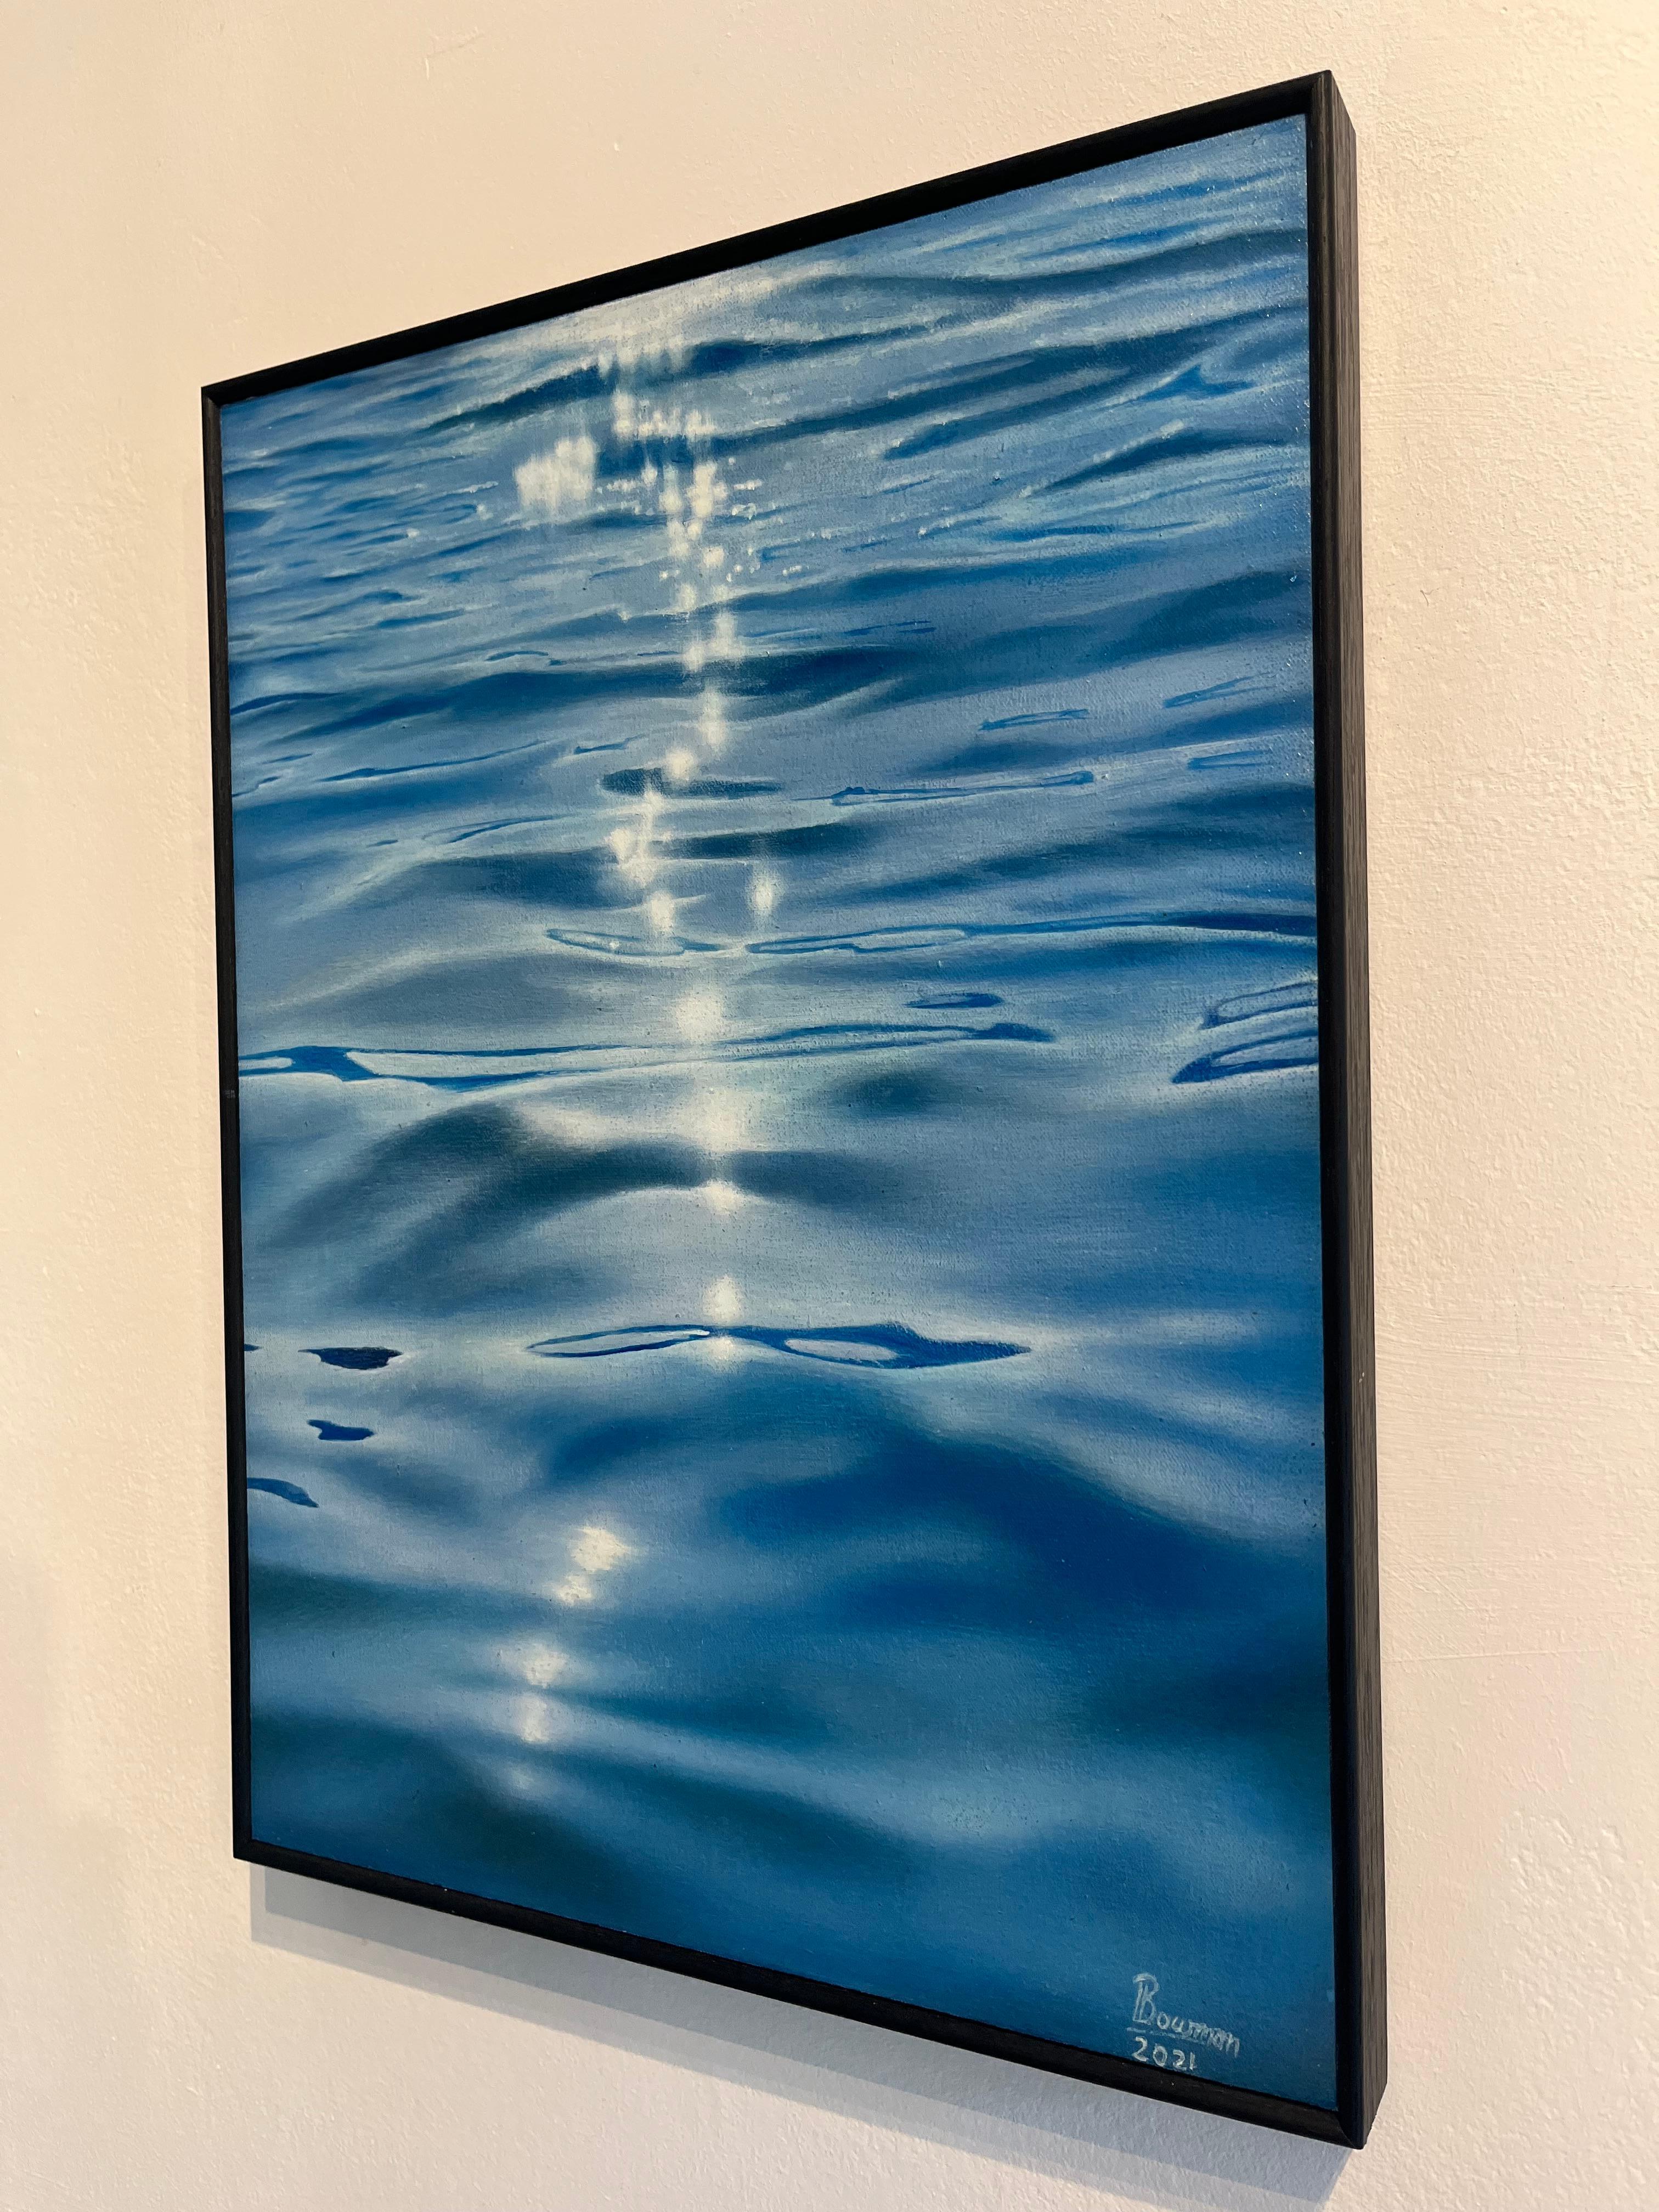 Motion Bliss - water study realism seascape original modern oil painting photo - Blue Figurative Painting by Leavon Bowman